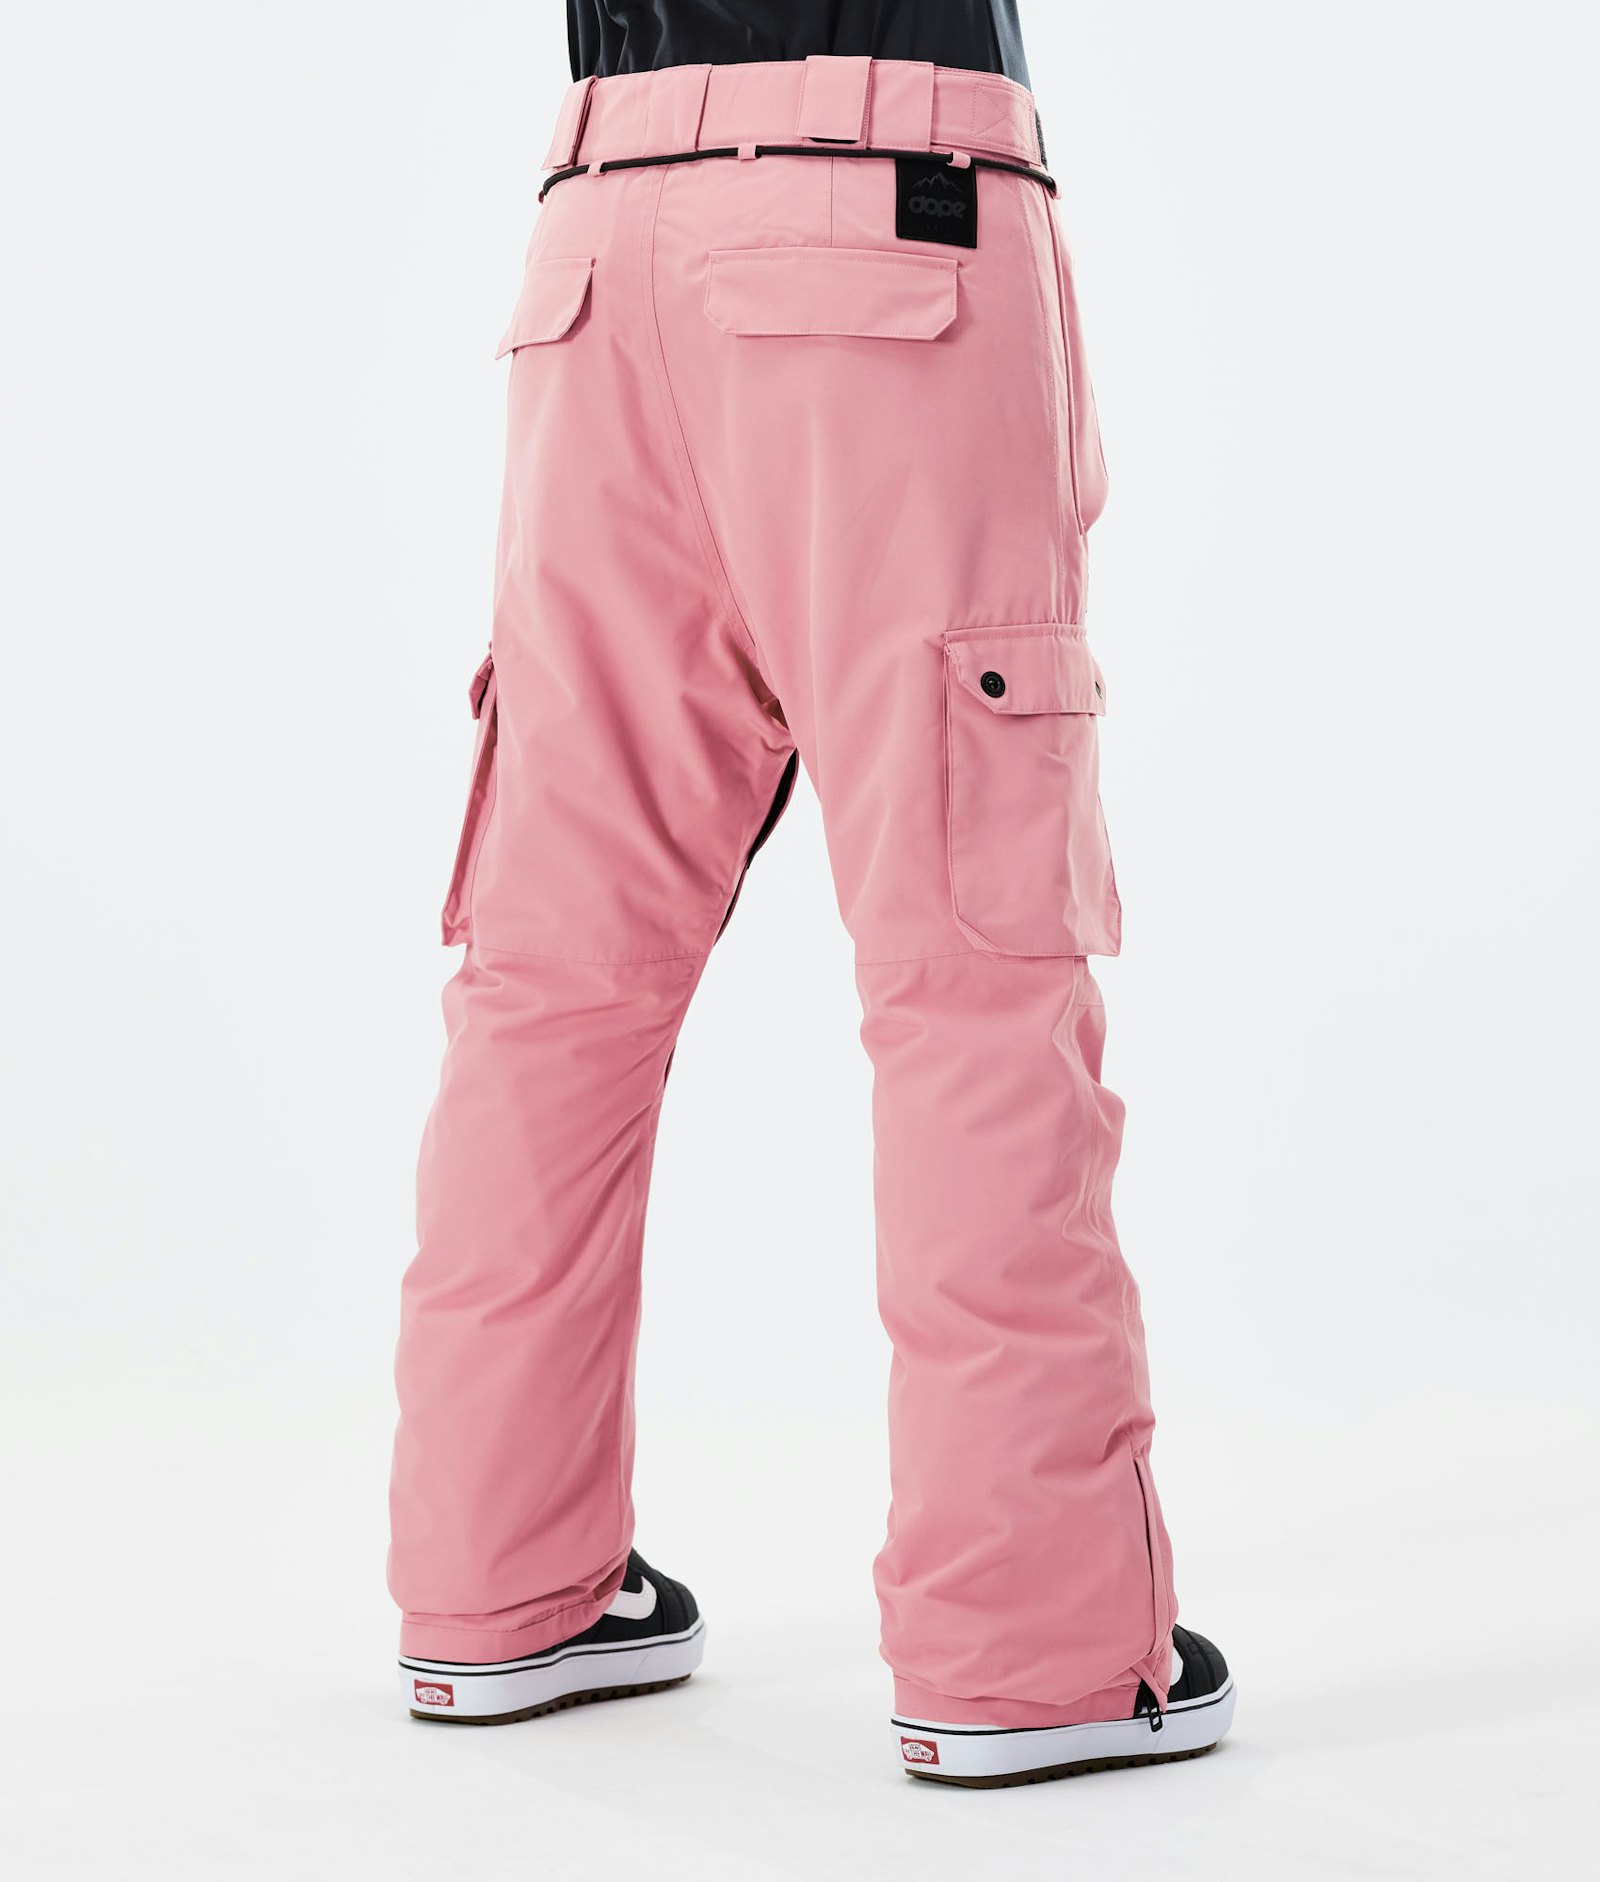 Dope Iconic W 2021 Snowboard Pants Women Pink, Image 3 of 6